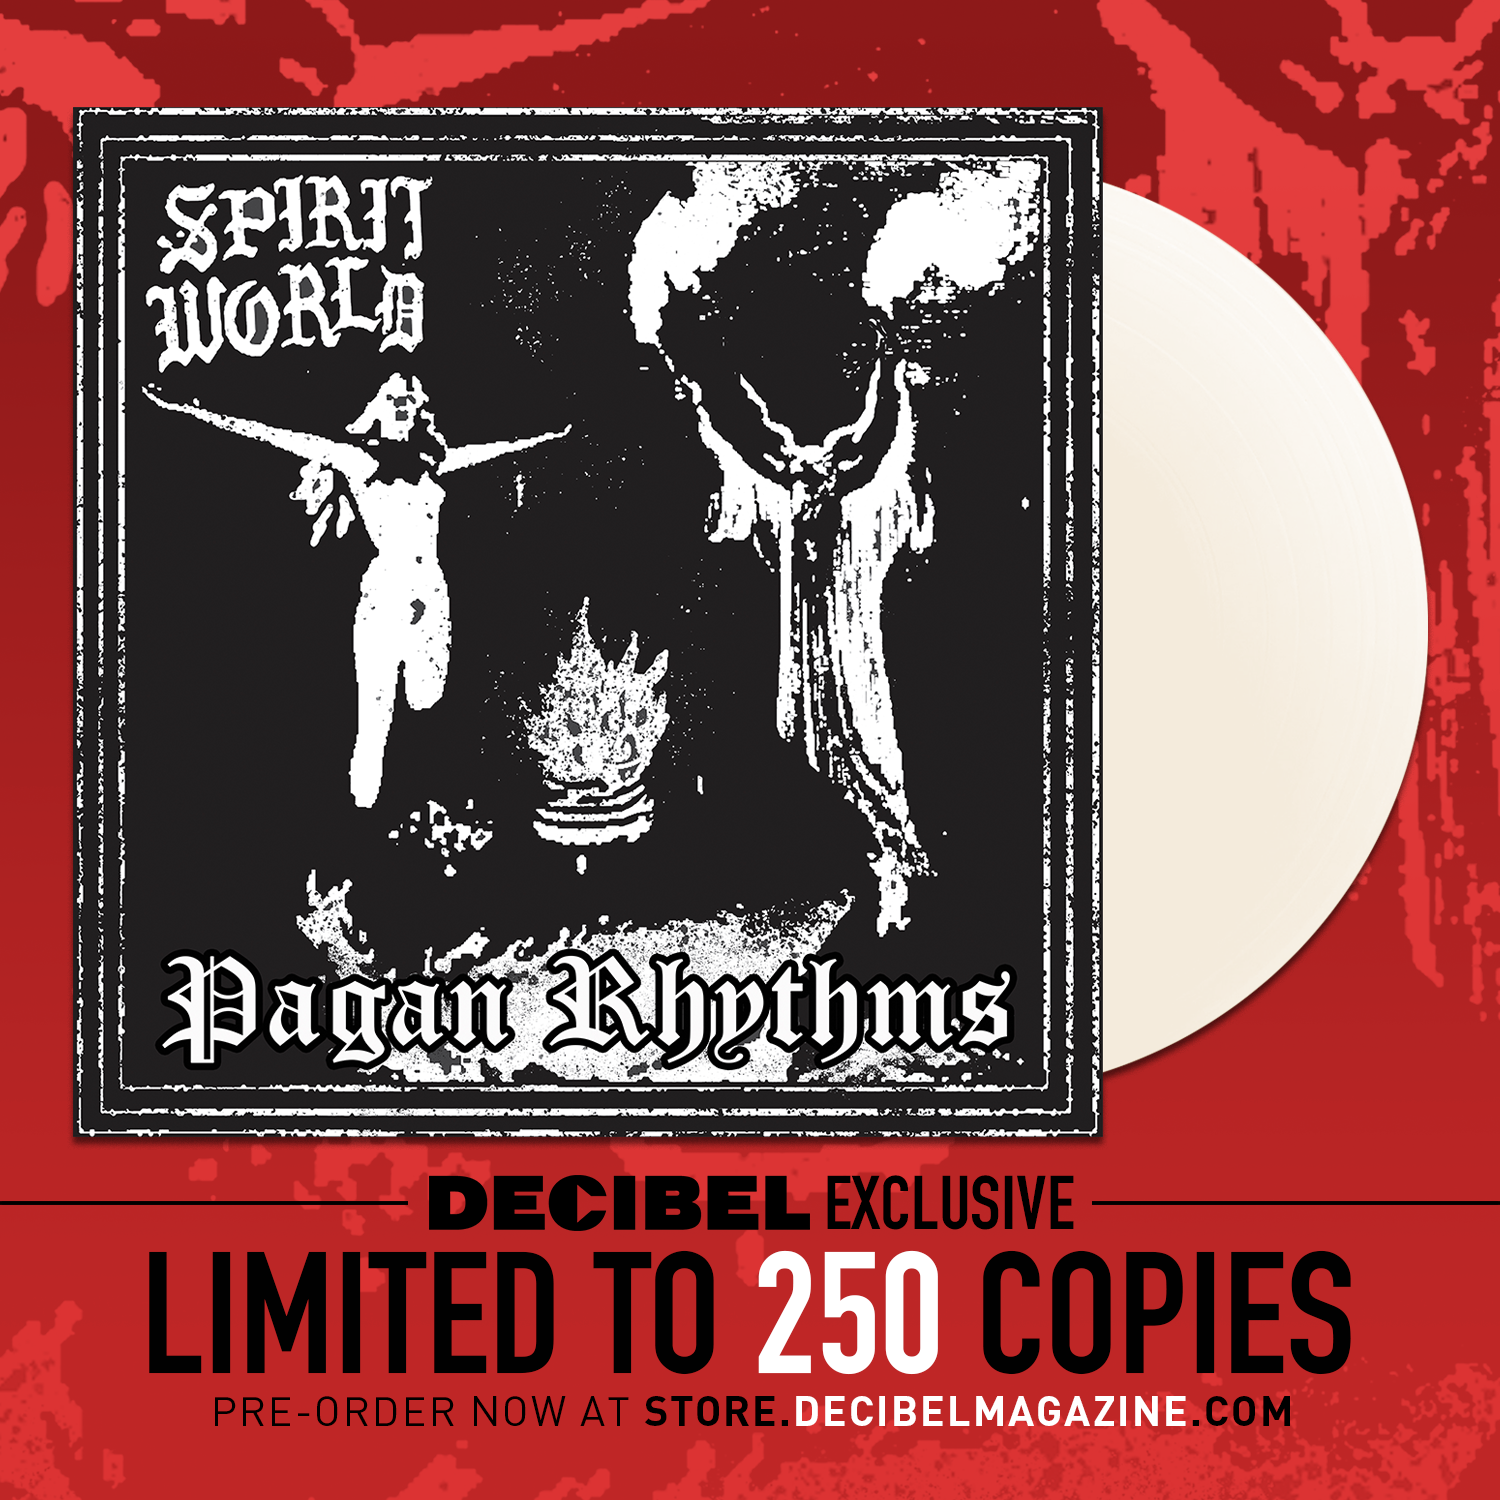 Get Exclusive New Colored Vinyl from KHEMMIS and SPIRITWORLD Pre-Orders From Decibel